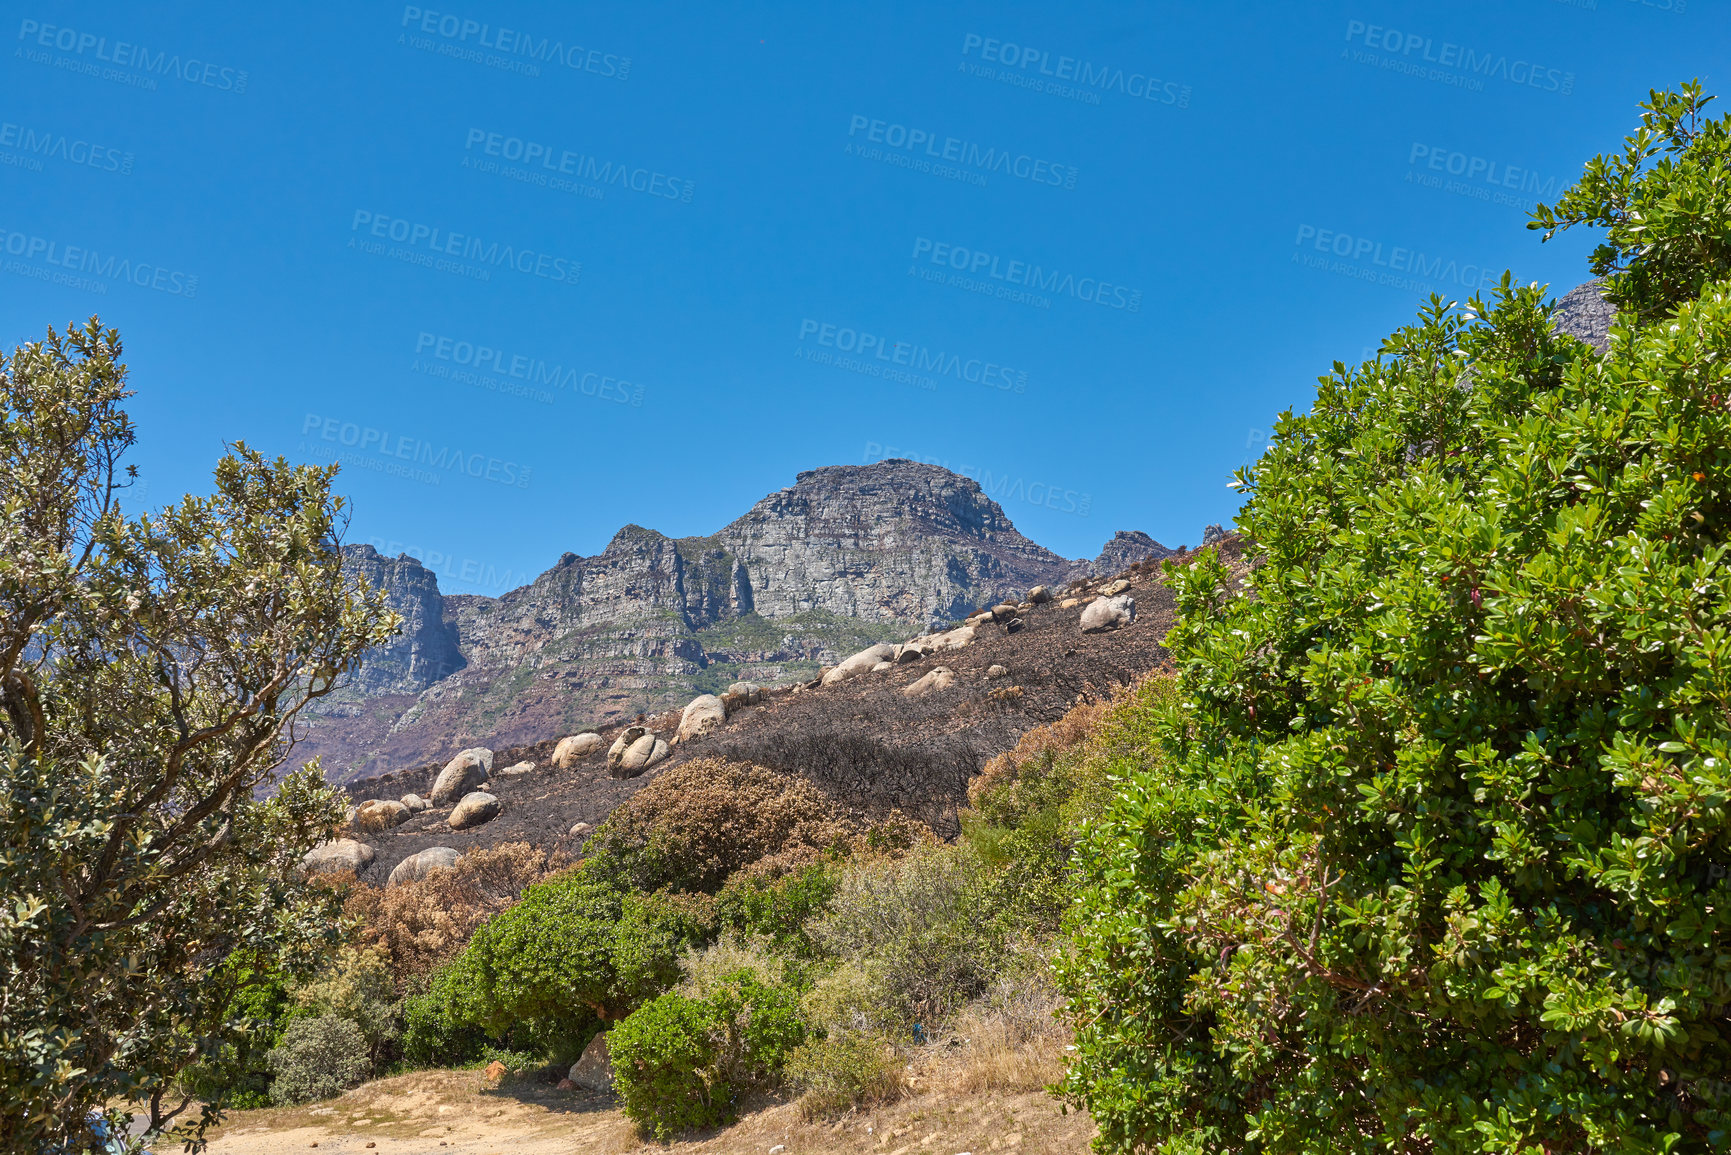 Buy stock photo Burnt land after fires on Table Mountain in Cape Town South Africa with blue sky background. Bushes of dead plants and destroyed vegetation in the aftermath of wildfires. Dry veld of natural wildlife